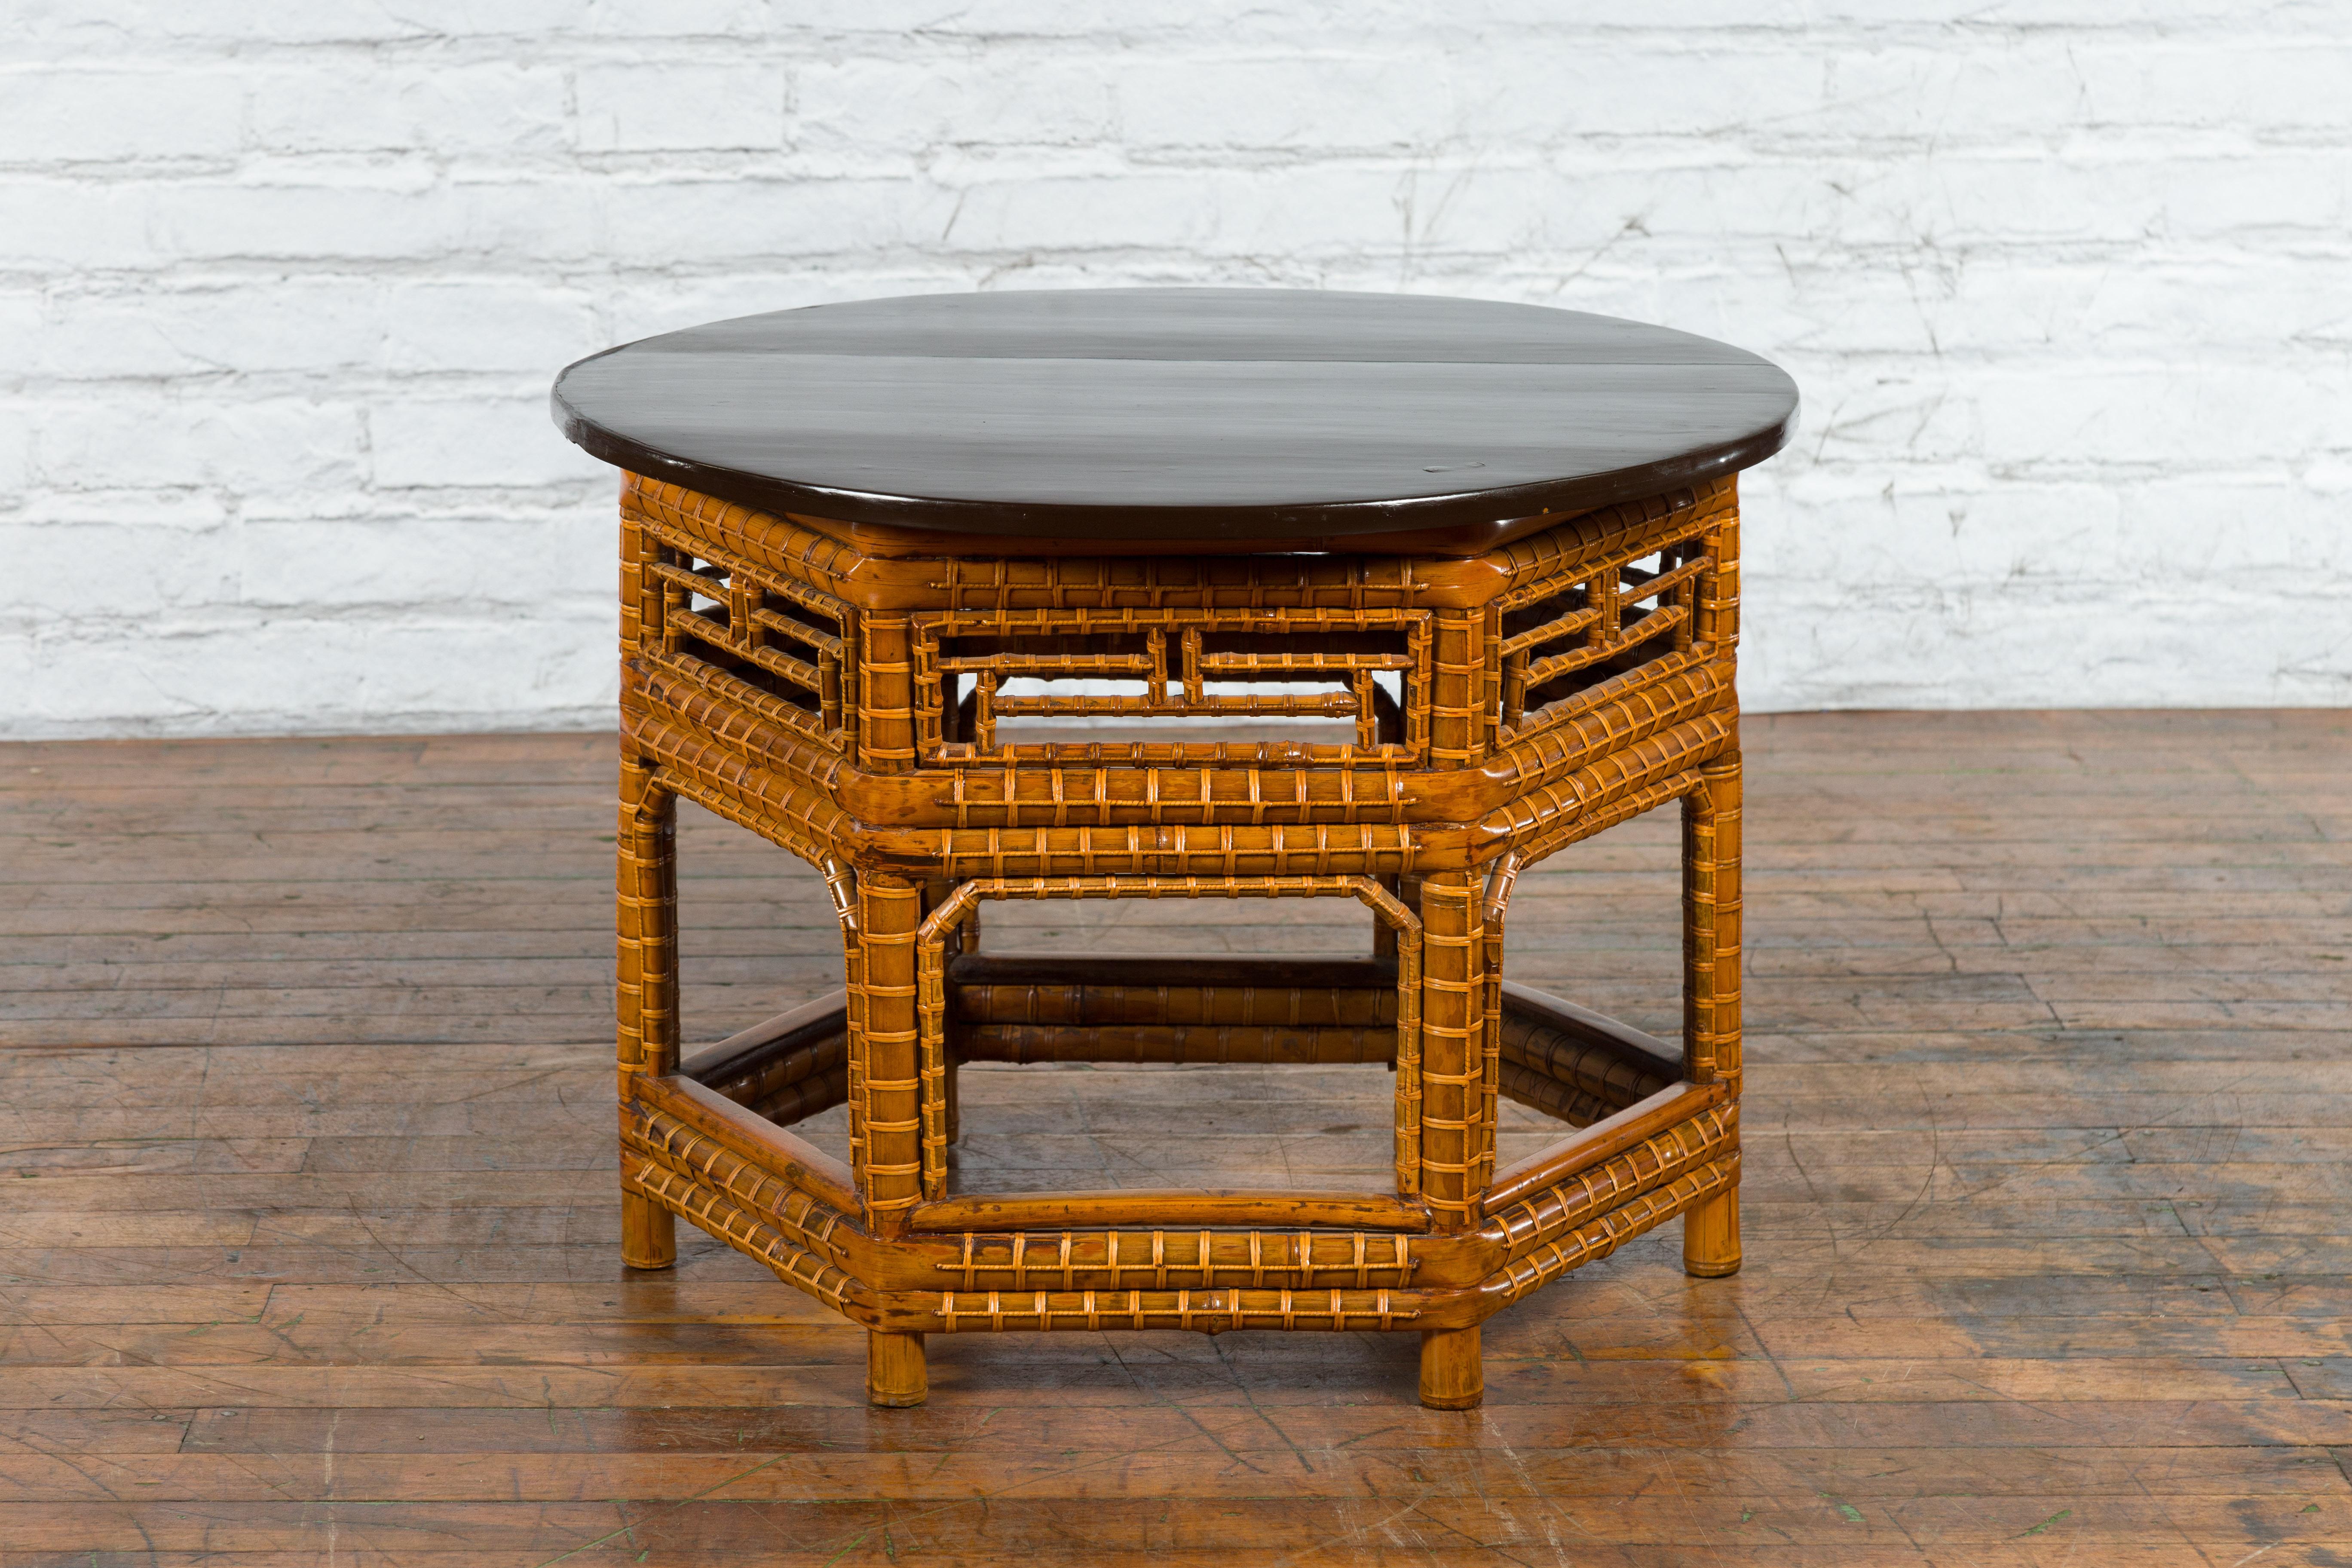 Chinese Qing Dynasty 19th Century Elm and Bamboo Coffee Table with Fretwork In Good Condition For Sale In Yonkers, NY